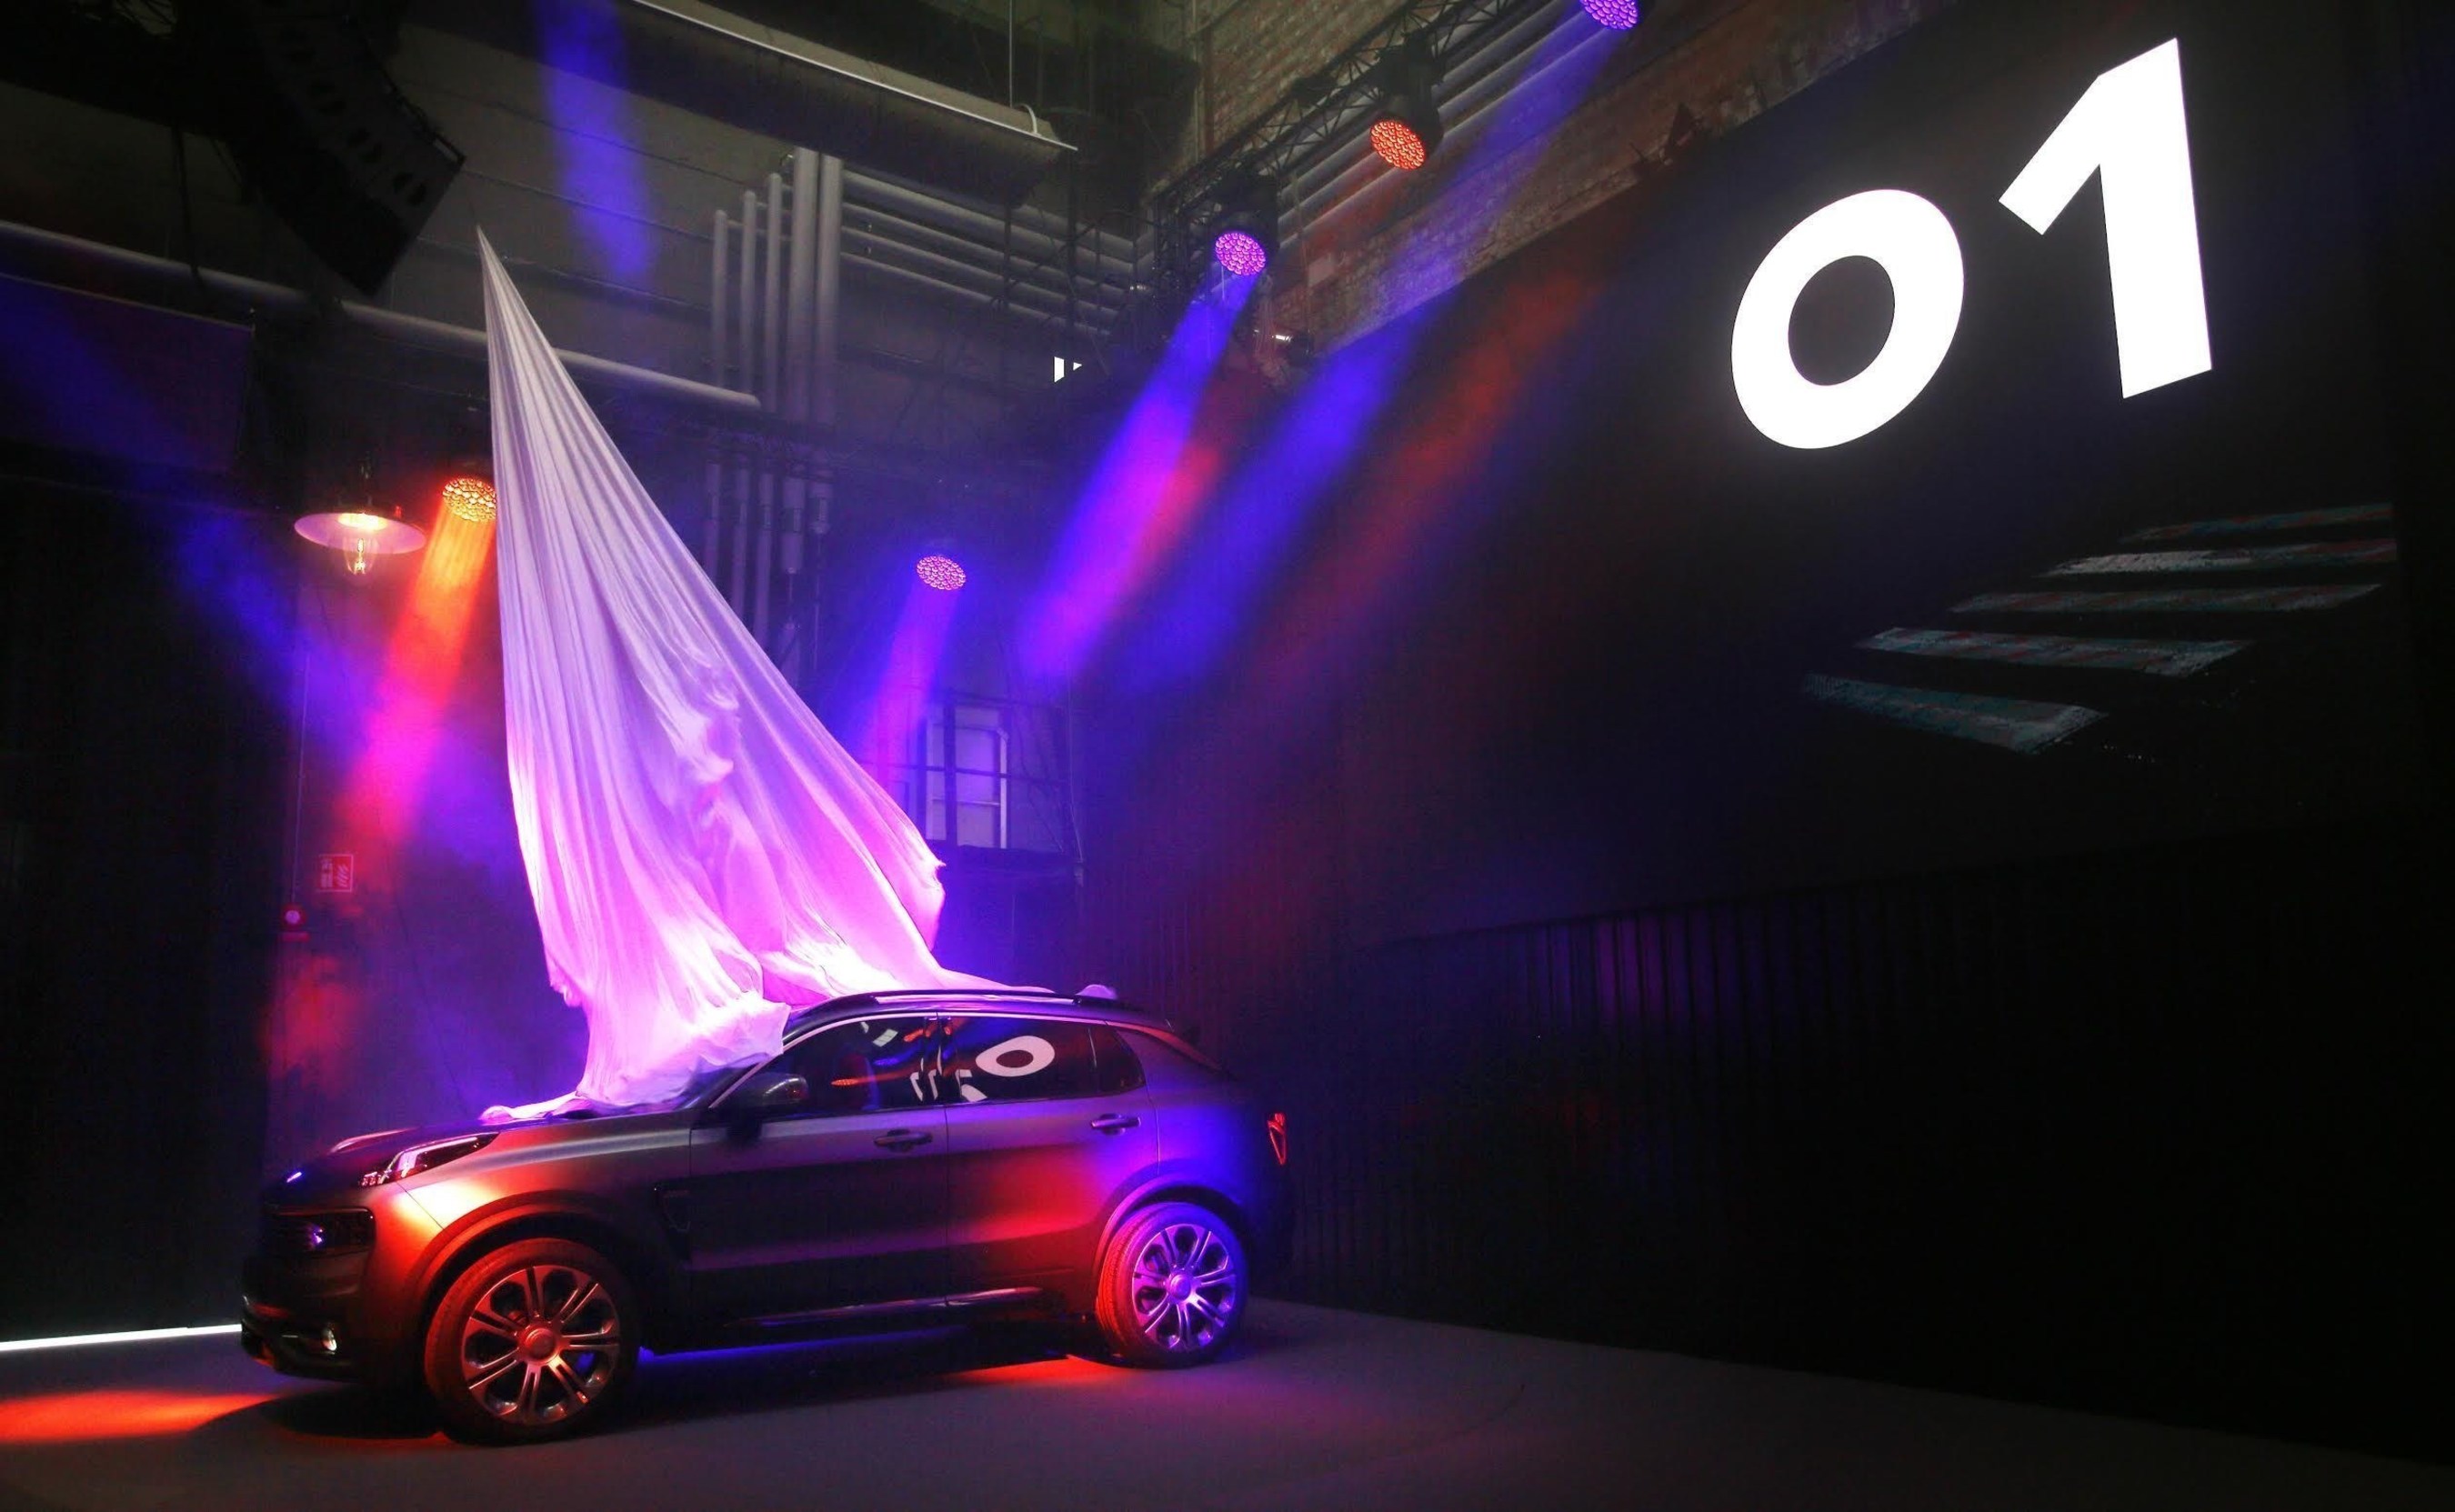 The LYNK & CO 01 is revealed to the world's media in Gothenburg